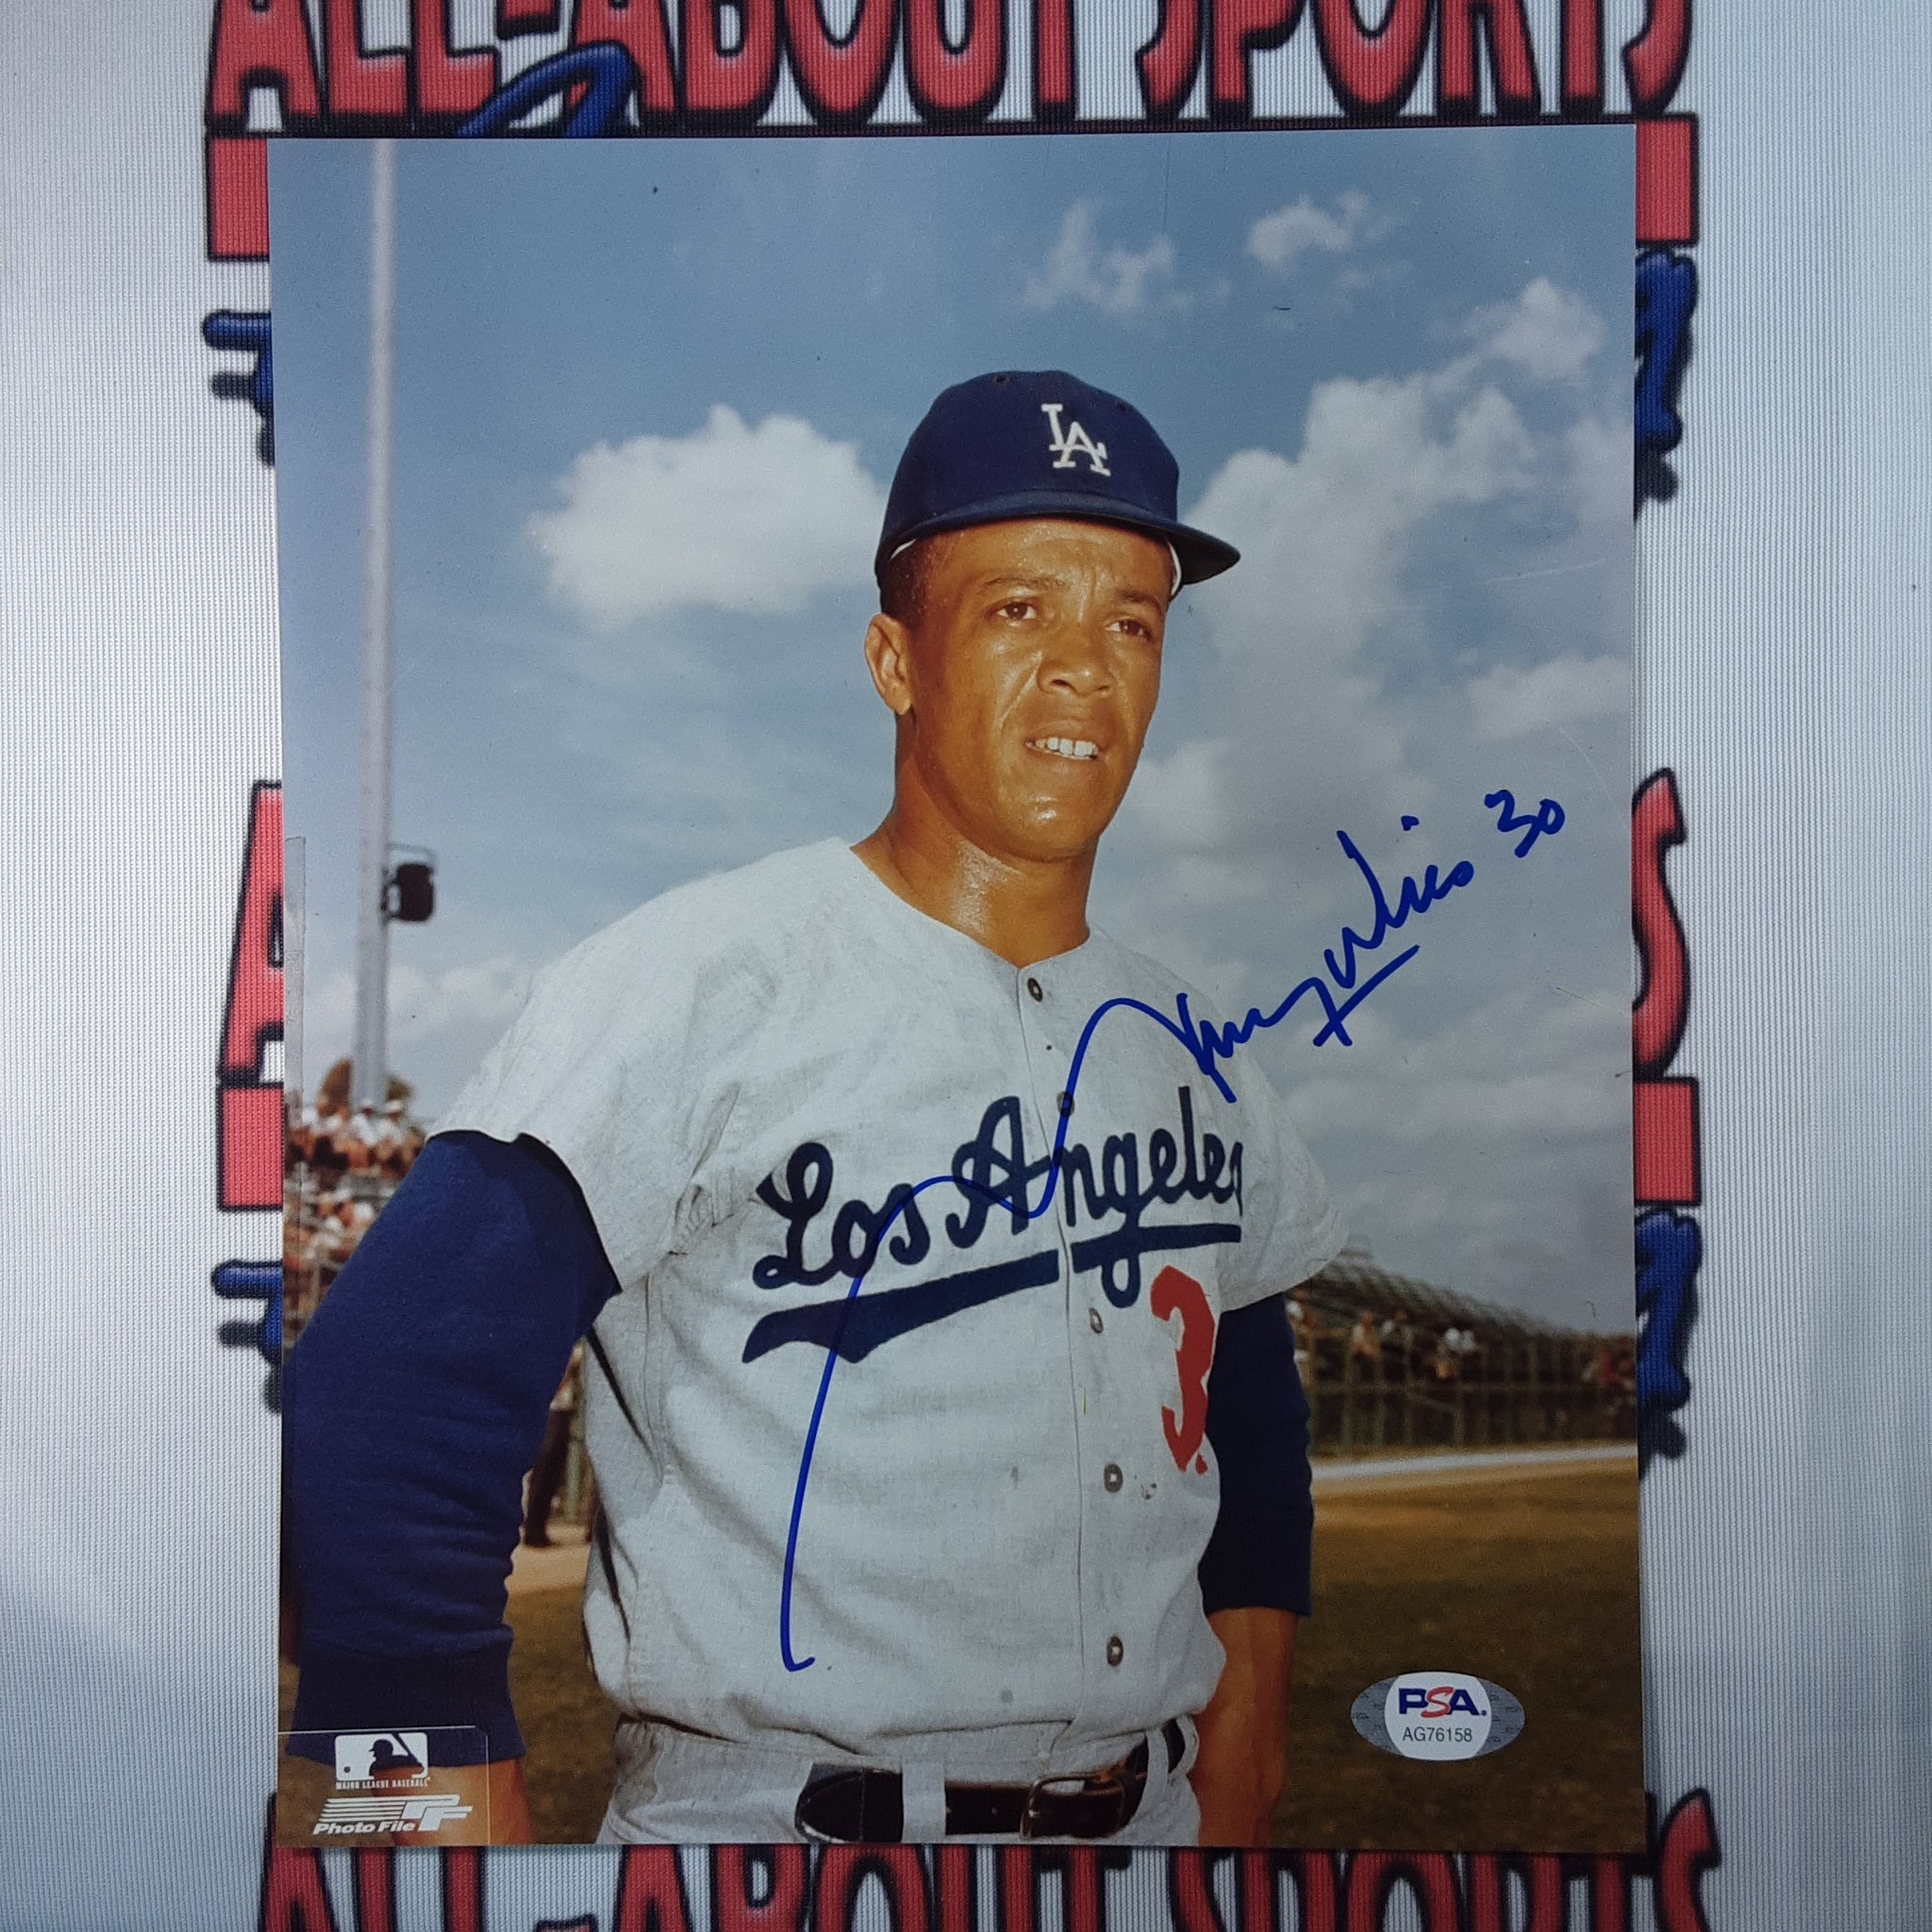 Maury Wills Authentic Signed 8x10 Photo Autographed PSA.